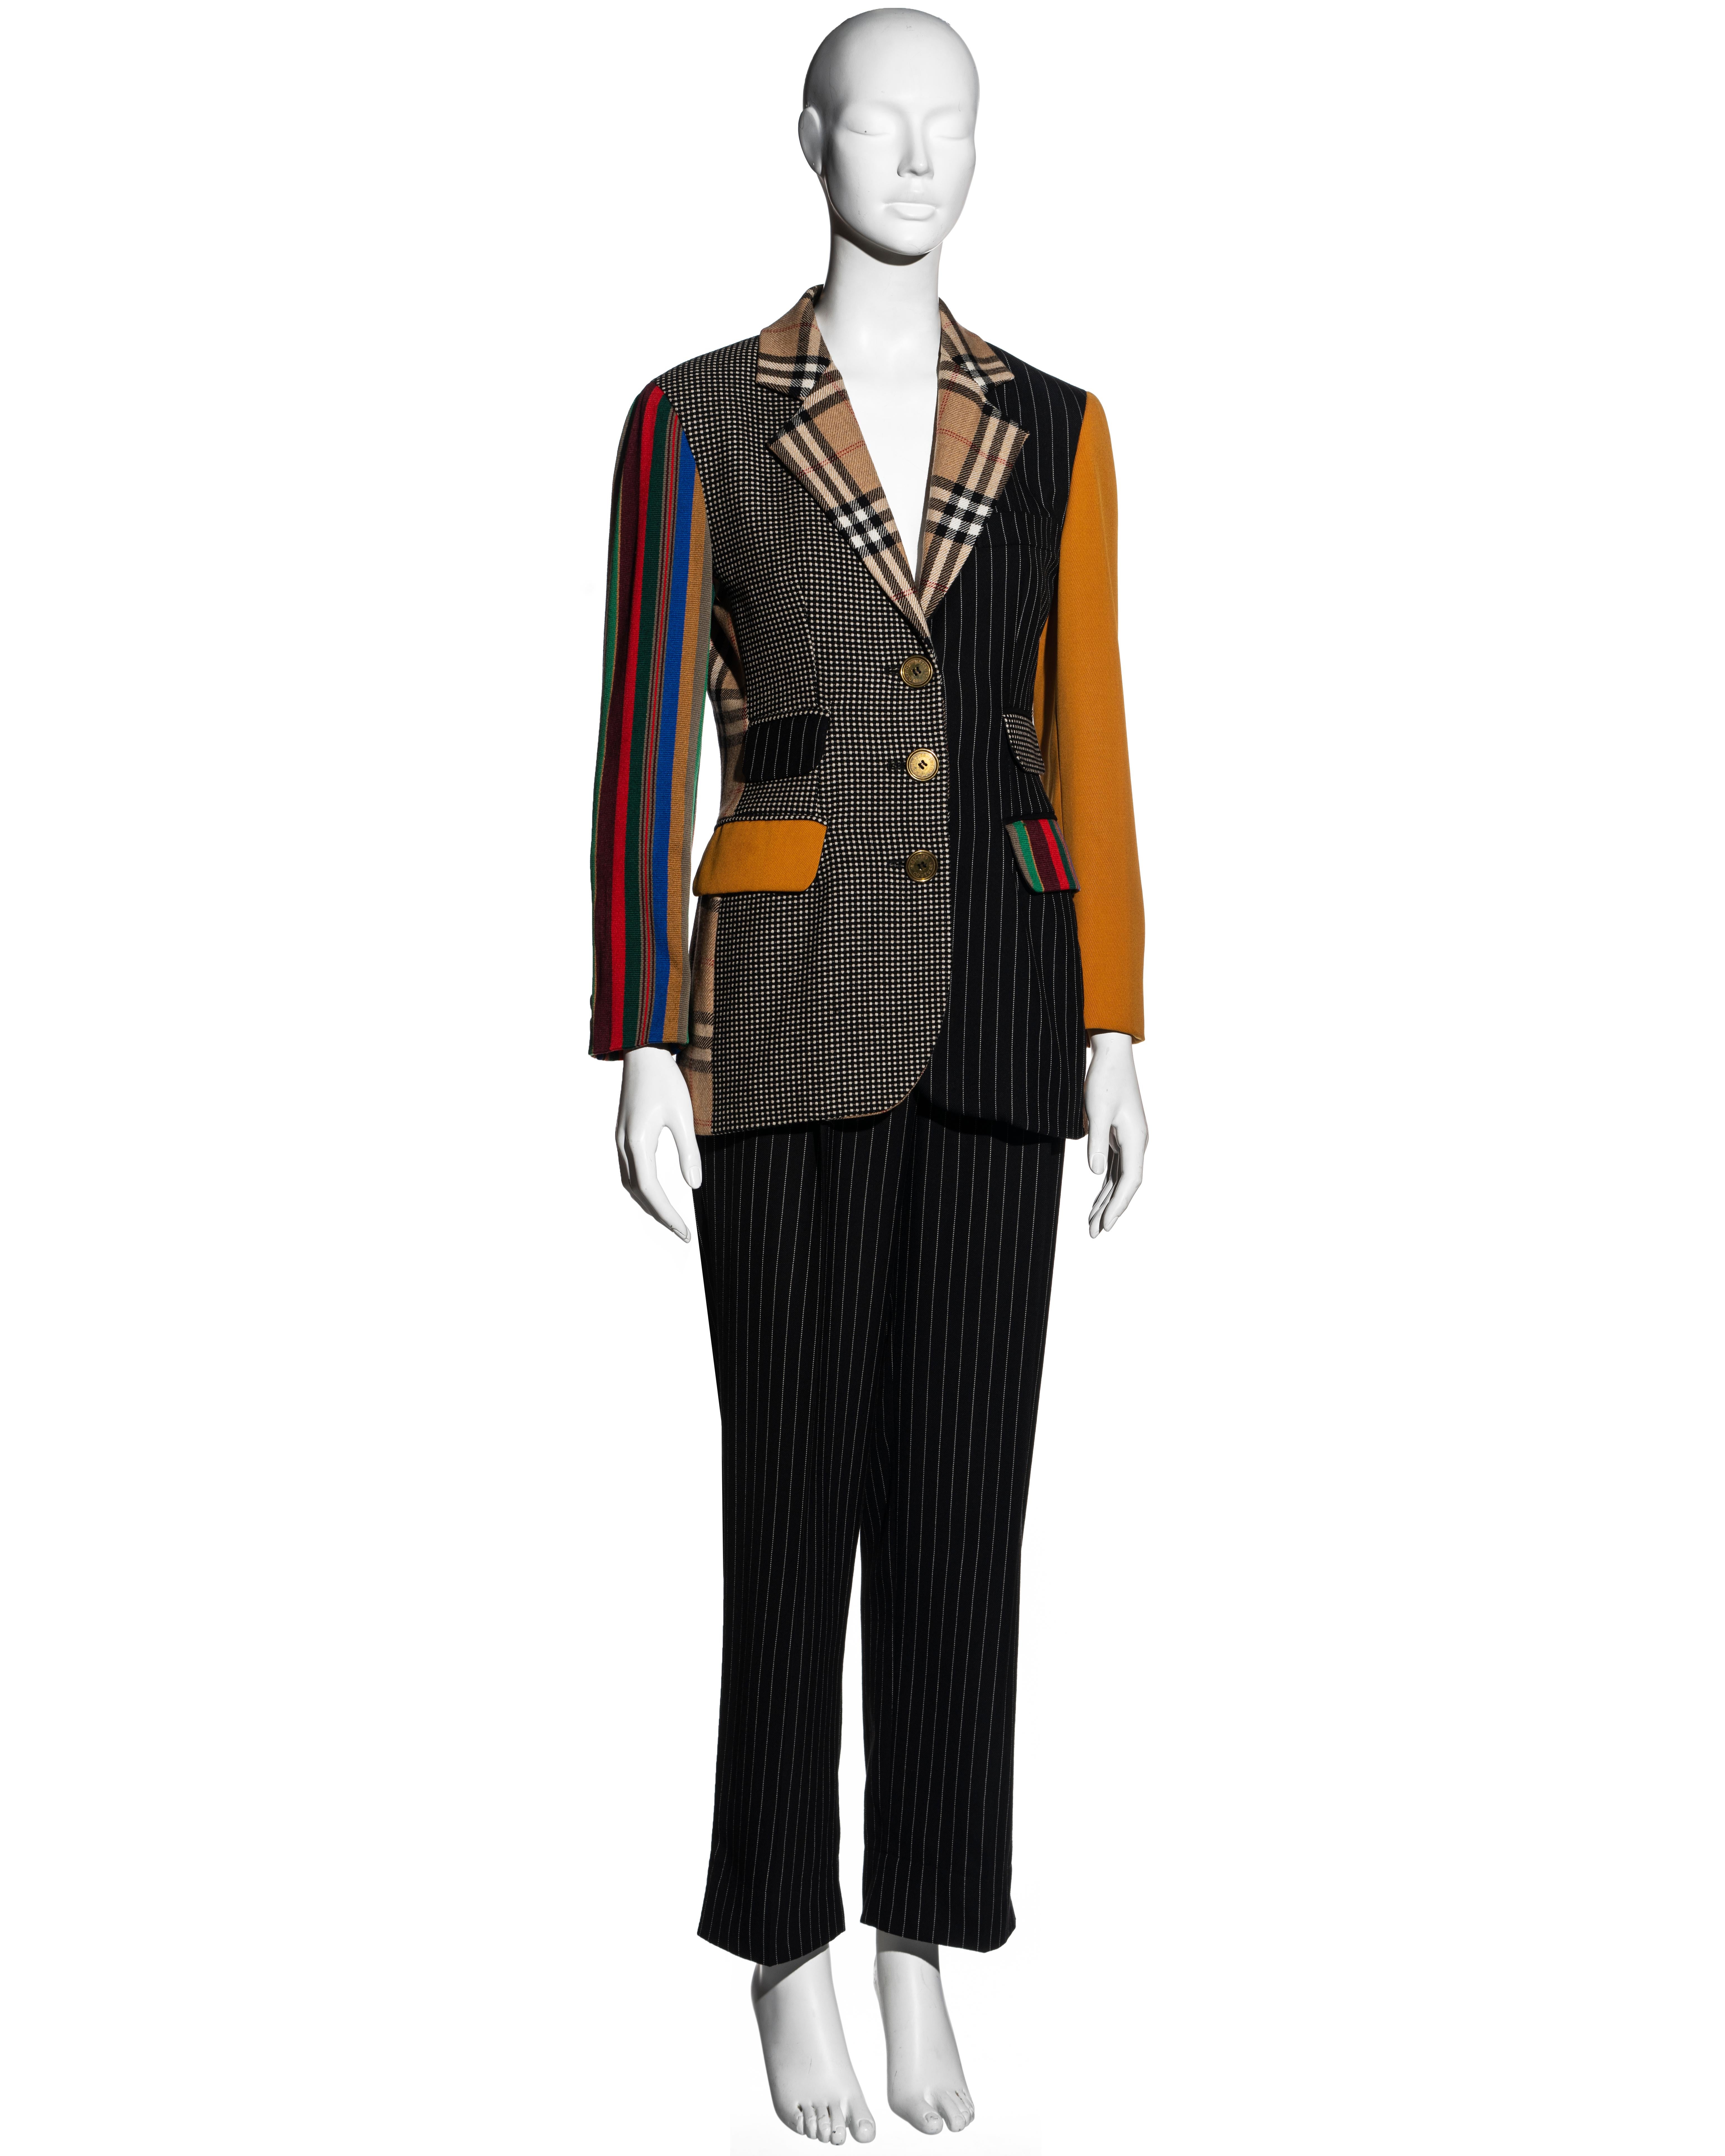 Women's Moschino Couture patchwork wool blazer jacket and pants suit, ss 1994 For Sale